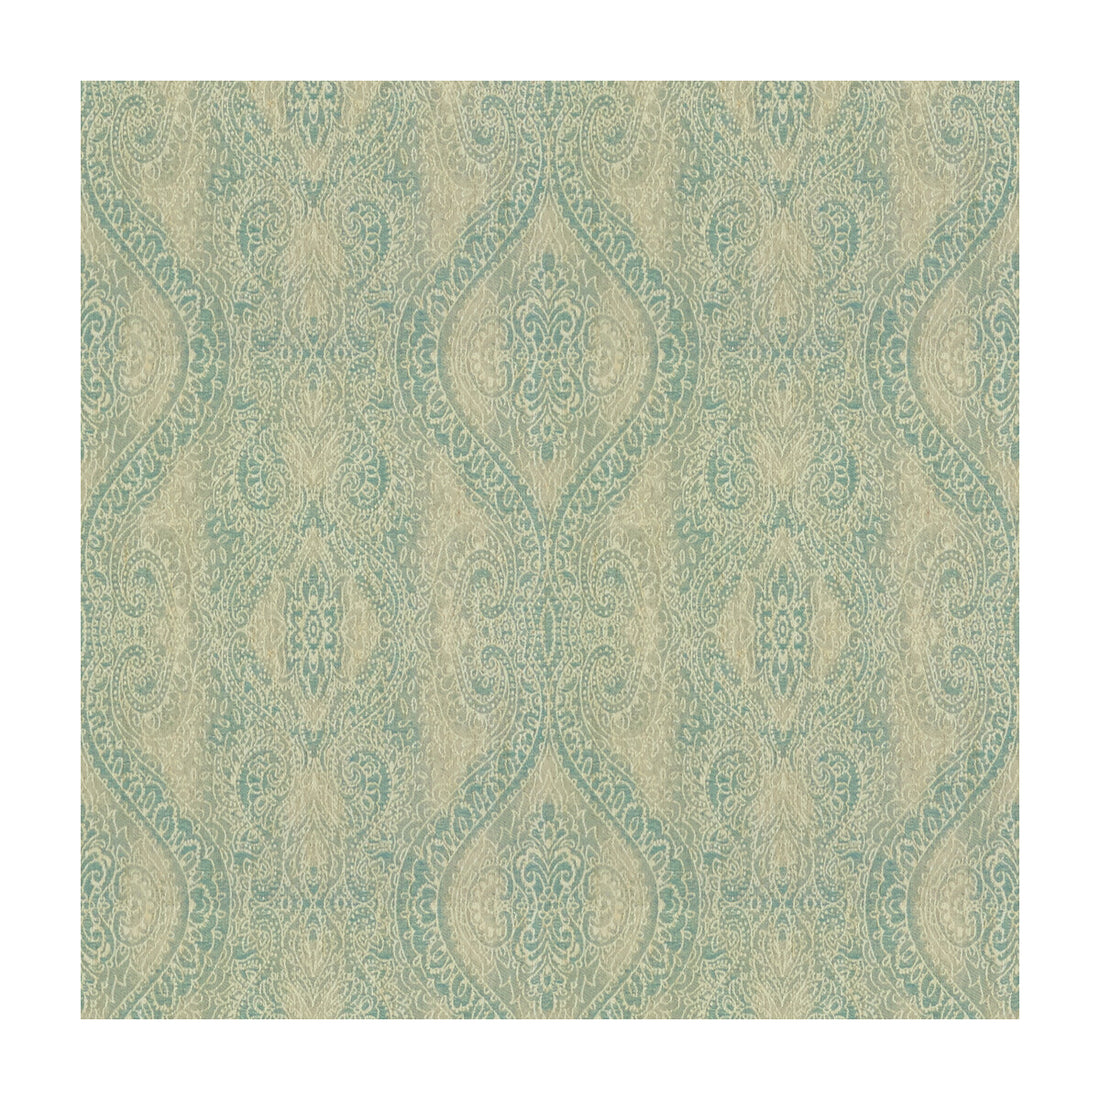 Kobuk fabric in seamist color - pattern 34162.15.0 - by Kravet Design in the Candice Olson collection